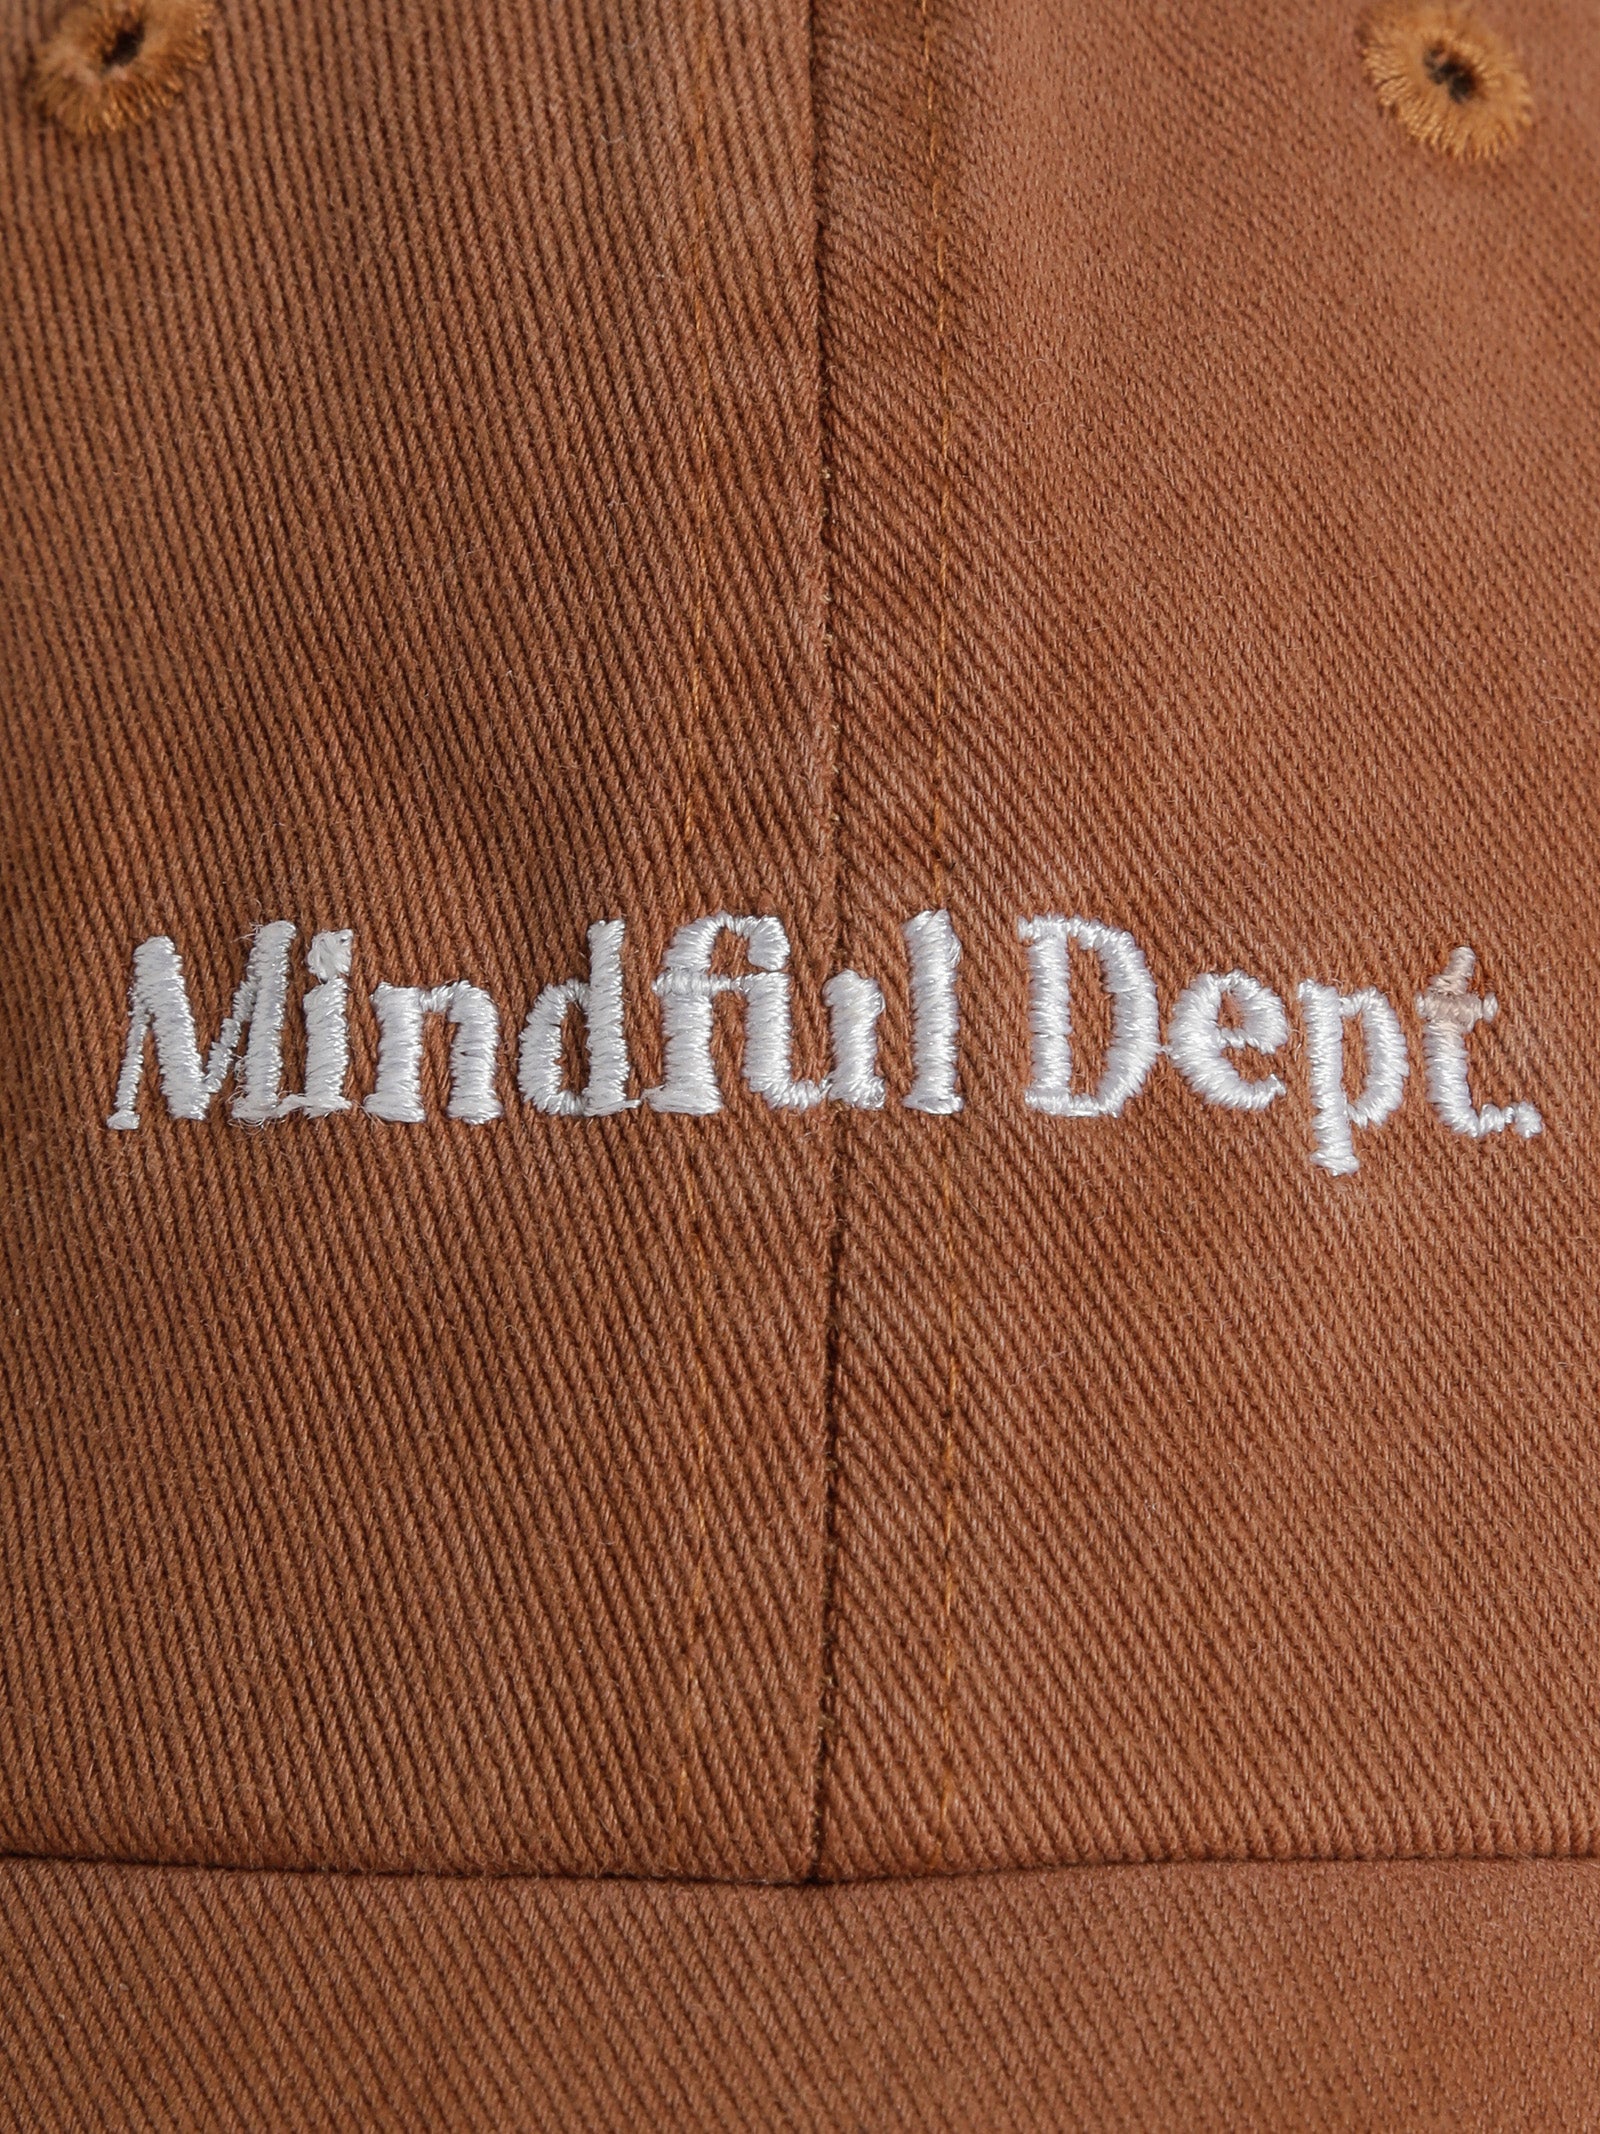 Mindful Dad Hat in Brown